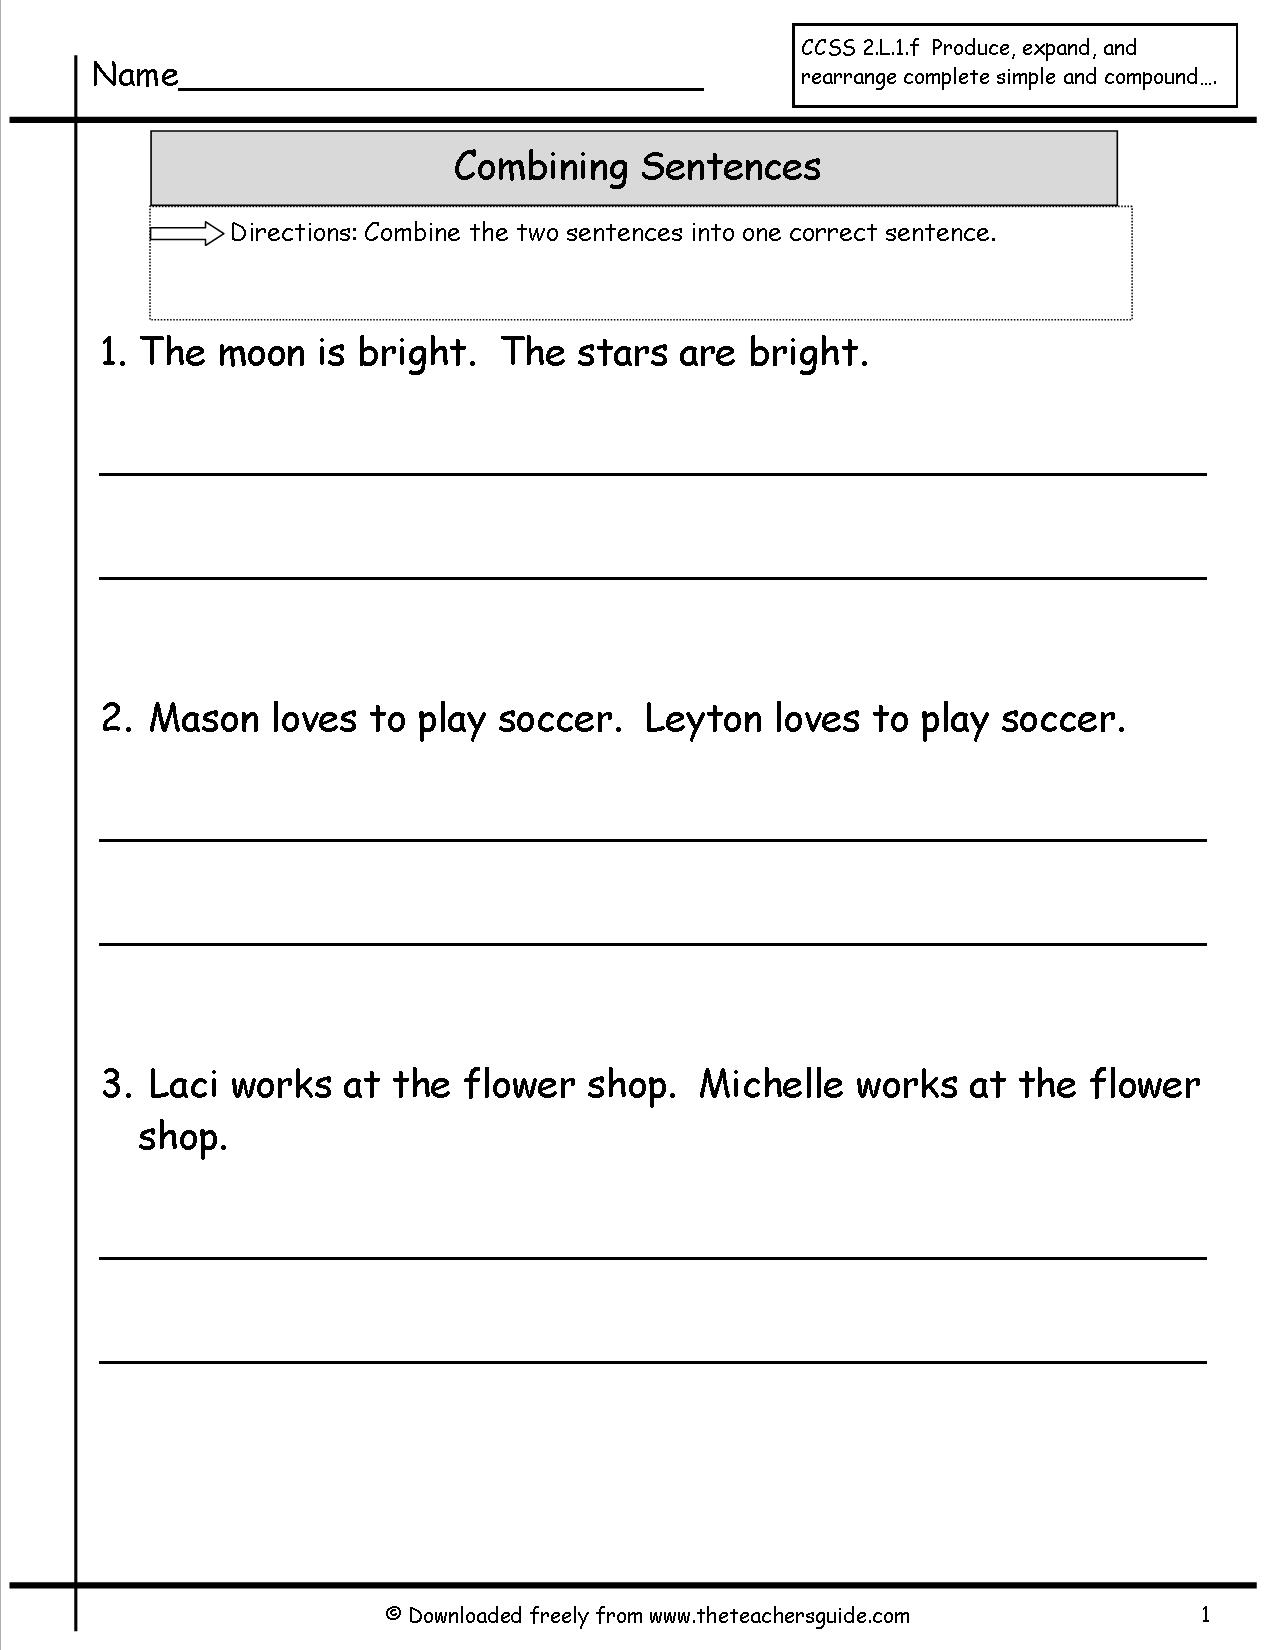 combining-sentences-worksheets-7th-grade-sentences-and-worksheets-on-pinterestcompound